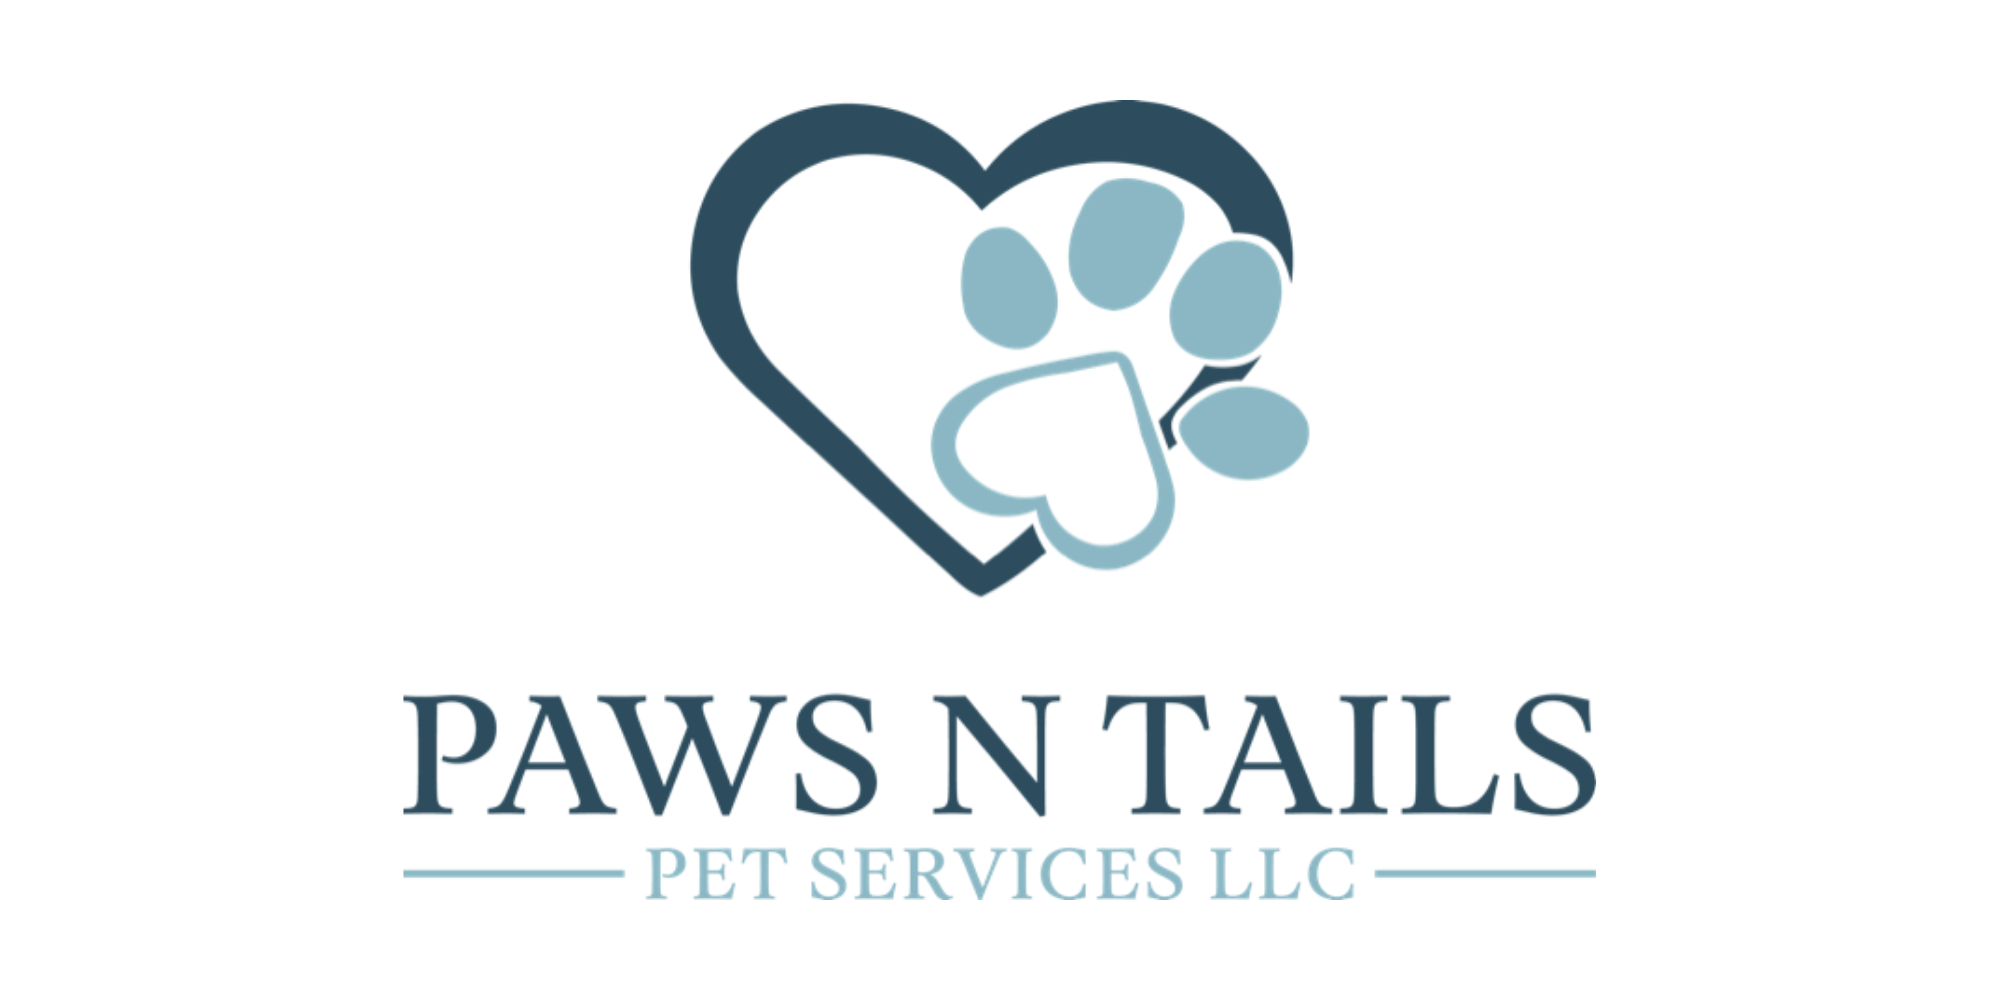 paws-n-tails-logo-summary.png